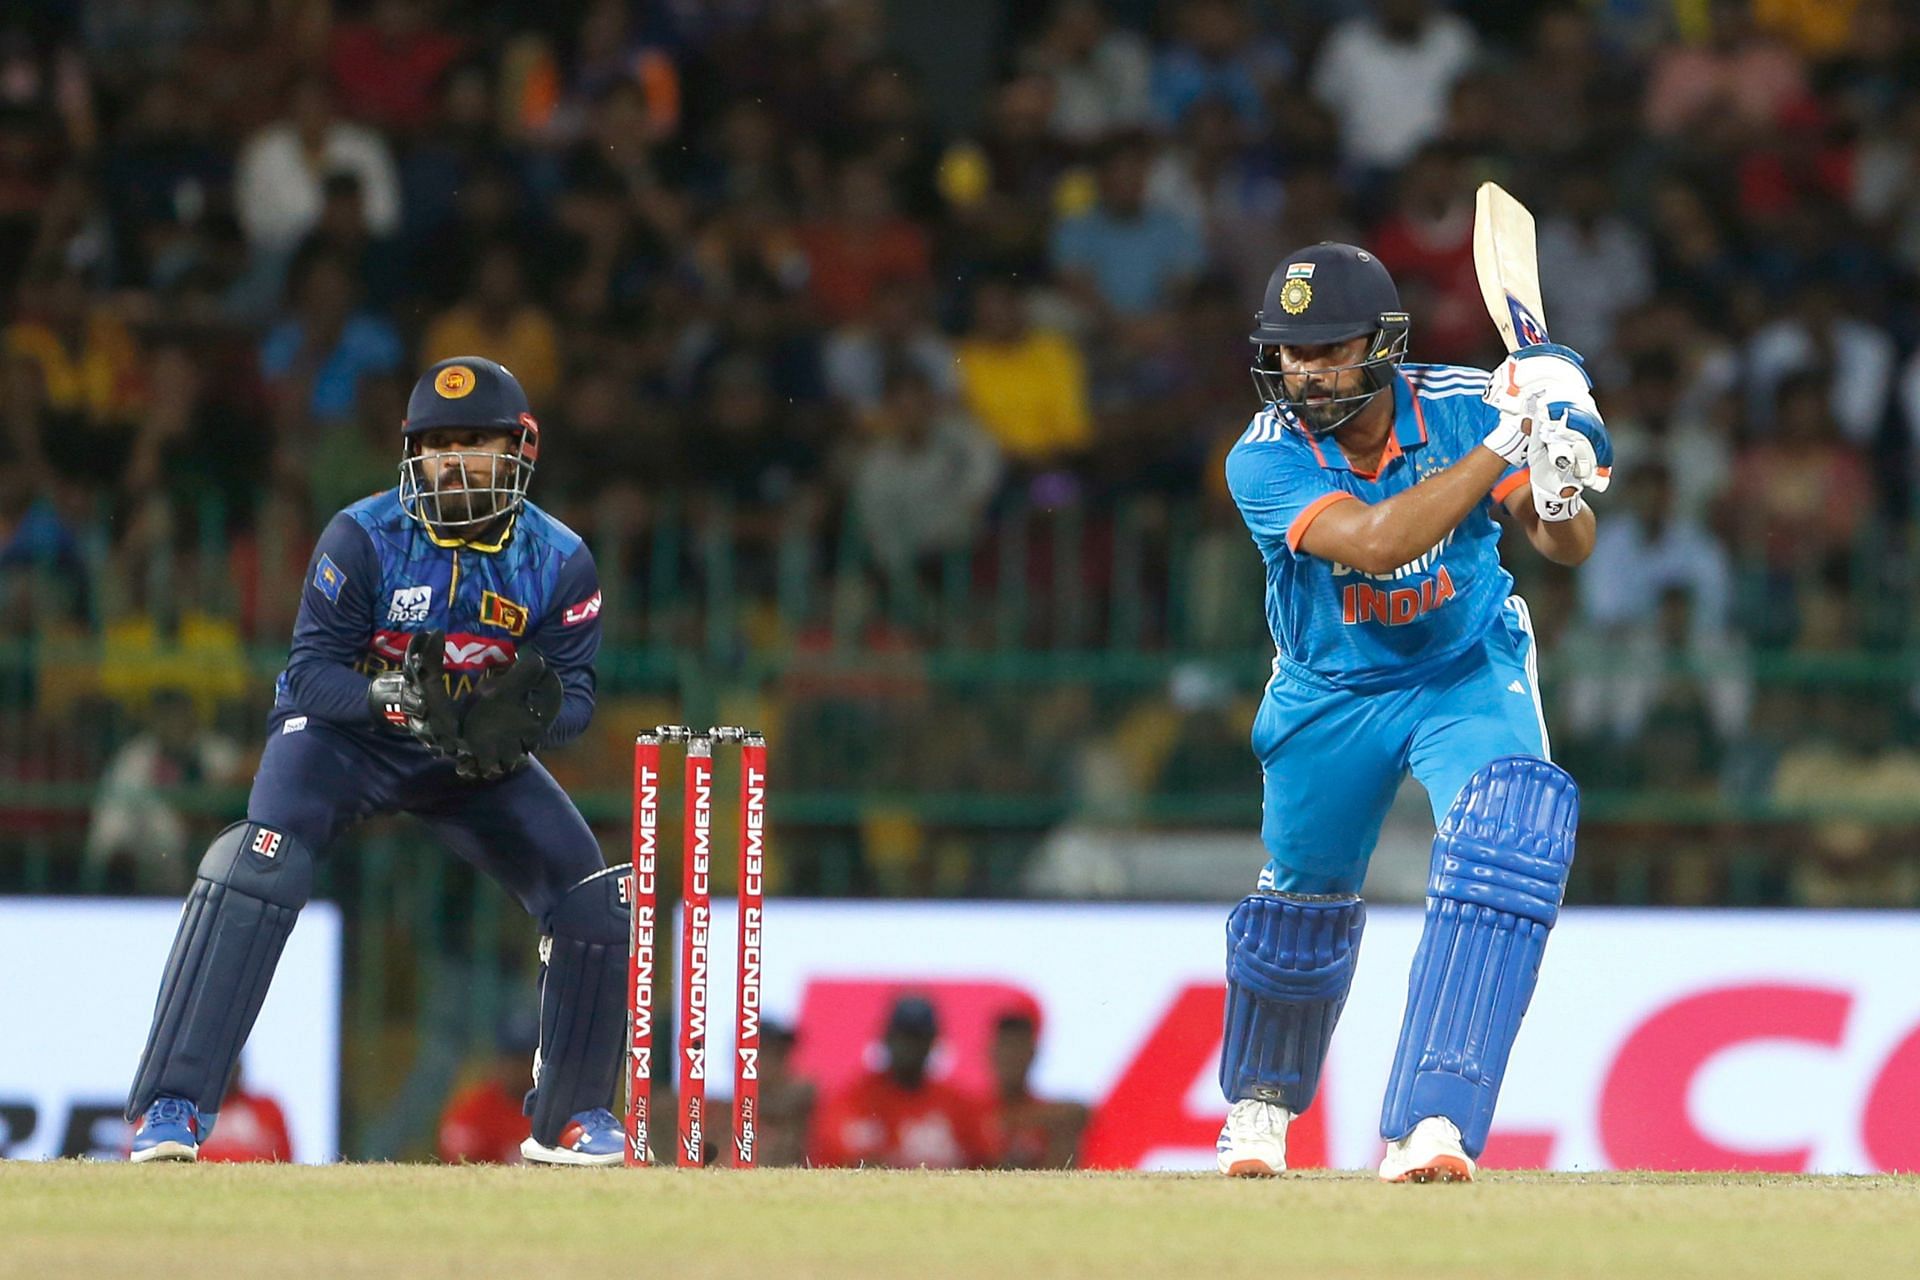 [Watch] Rohit Sharma hits a stylish six to finish his half-century in just 33 balls during 1st IND vs SL ODI